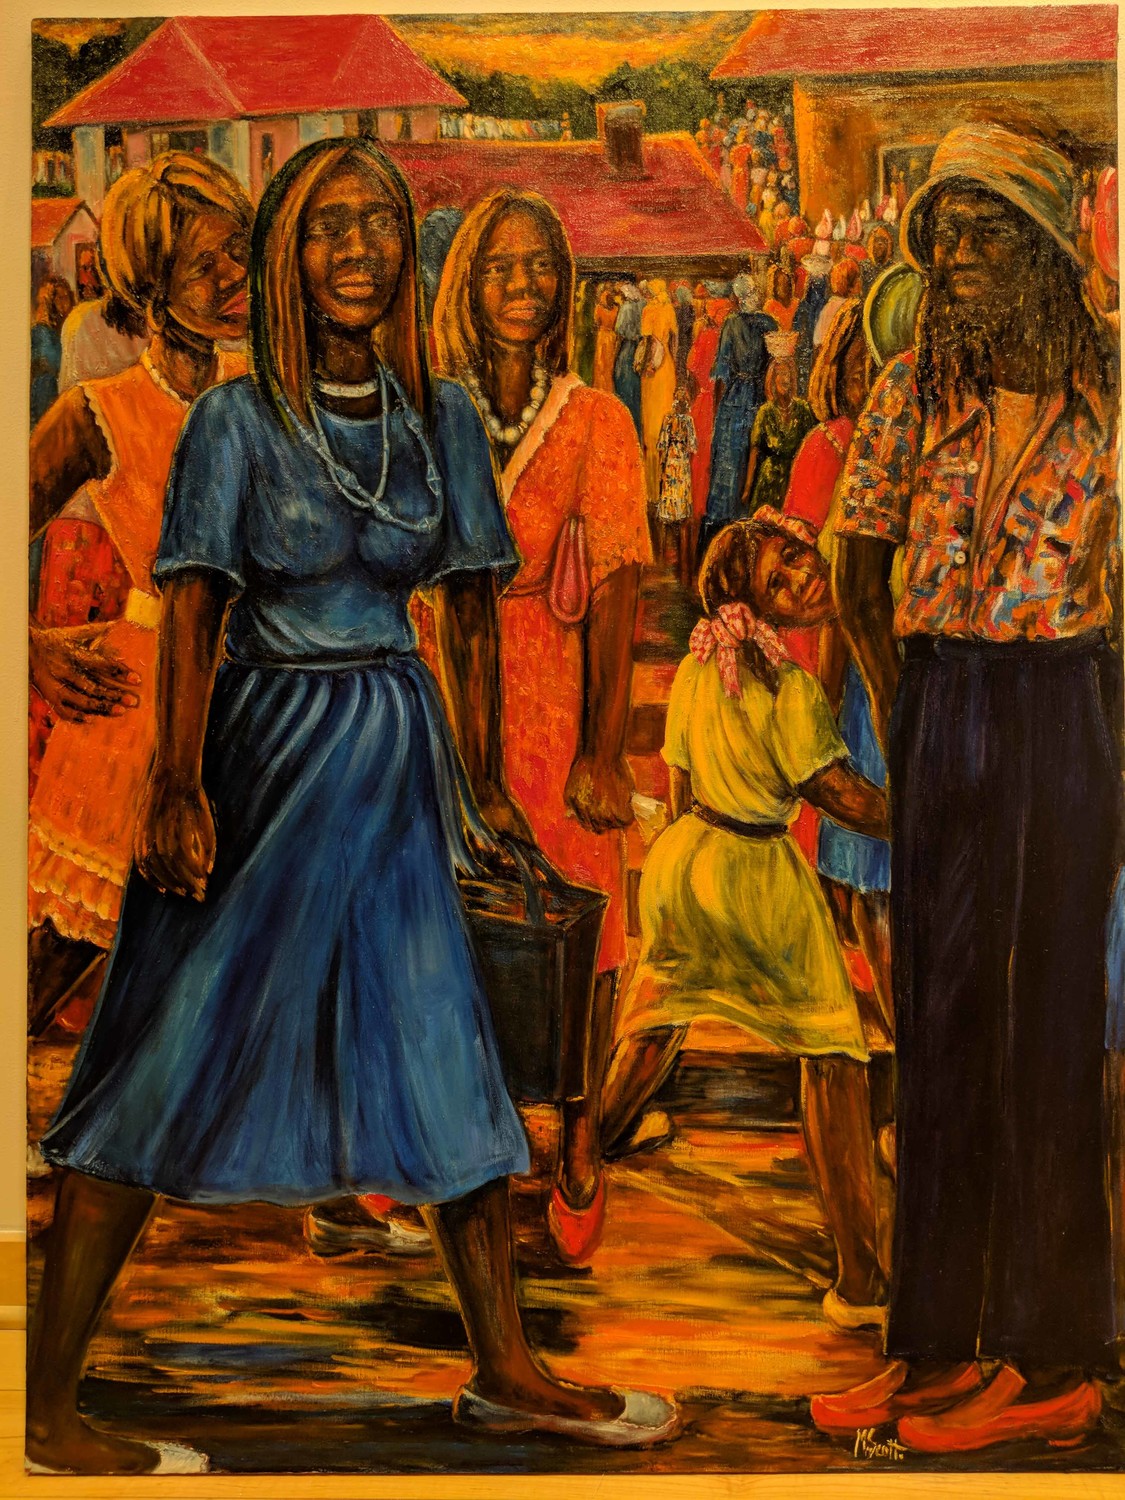 Madge Scott’s ‘Touching the Skies’ is one of the pieces featured in ‘The Way Back,’ an exhibit celebrating Black History Month at the Yonkers Public Library’s Riverfront Art Gallery. The exhibit runs through Feb. 21.